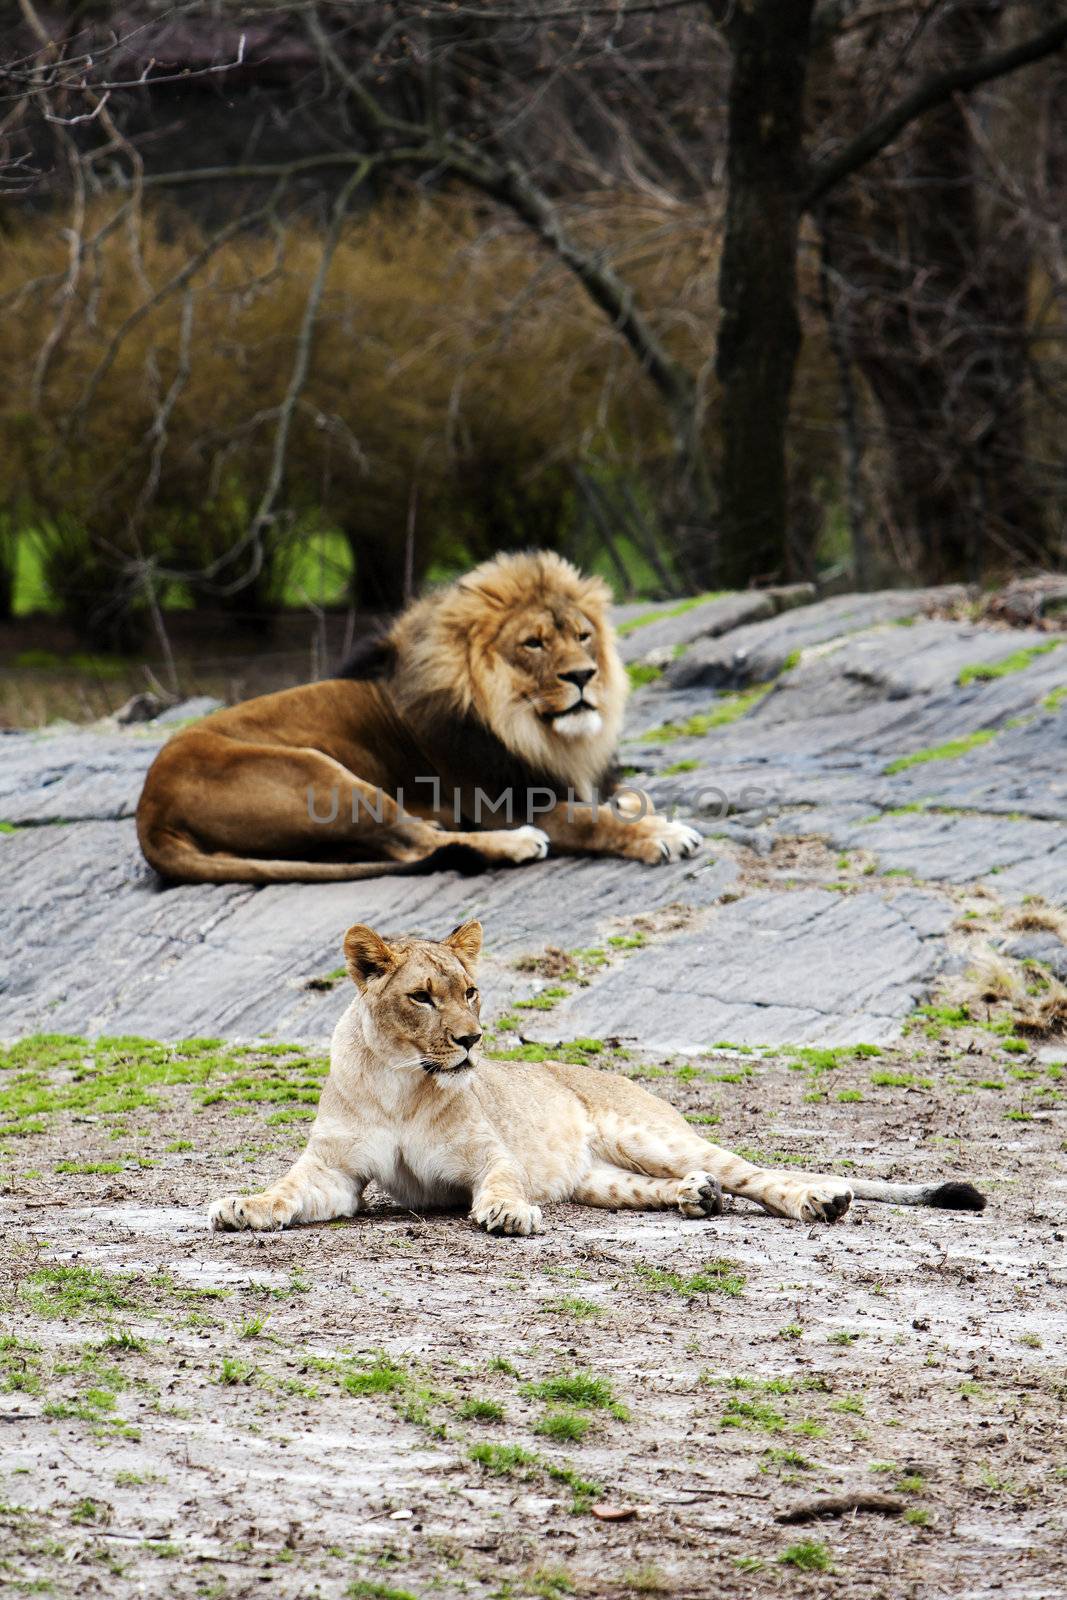 Lion and Lioness laying together by phakimata